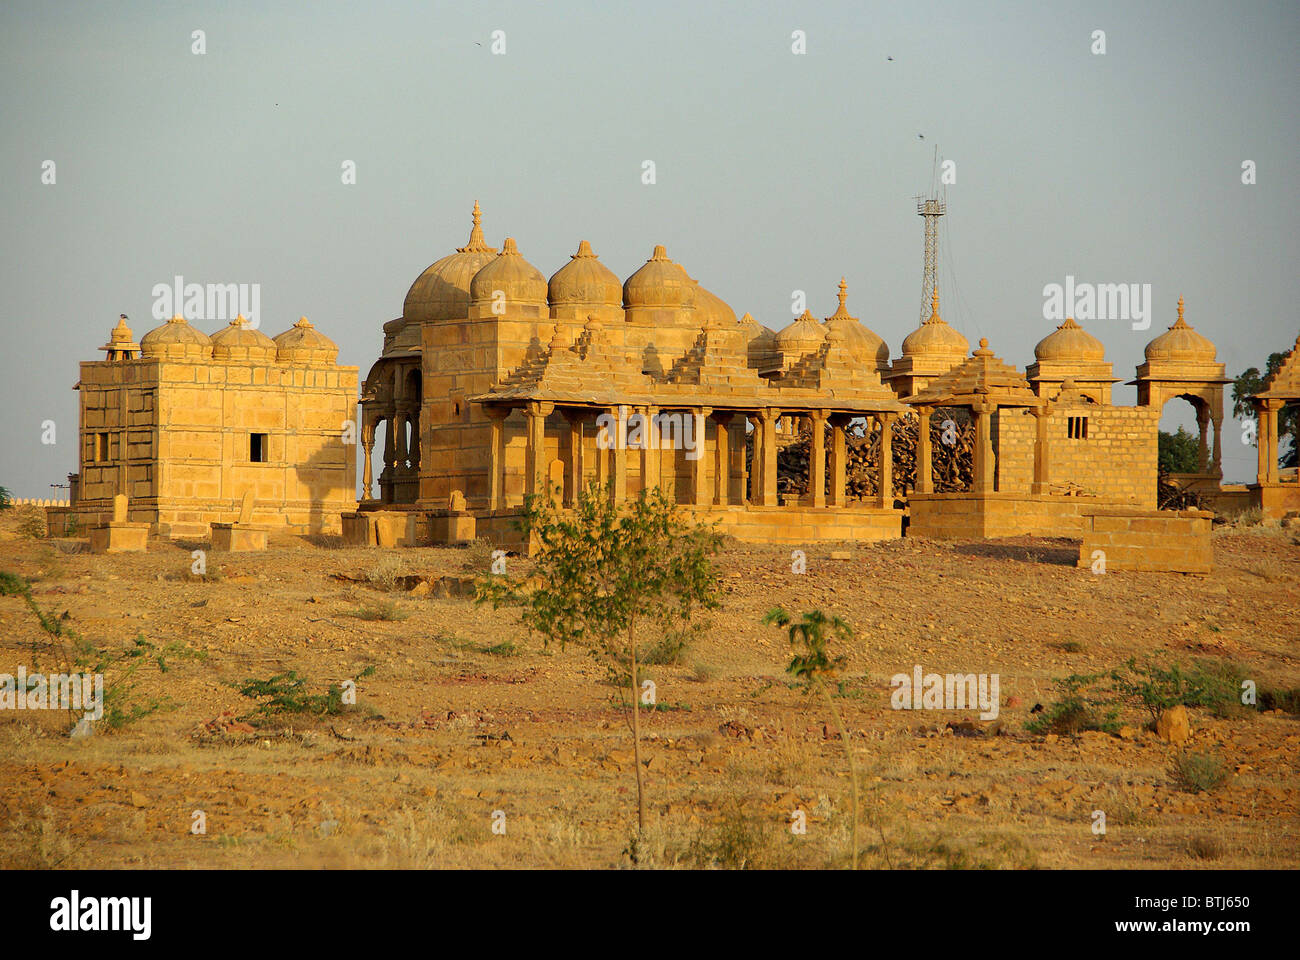 Rajput tombs in Rajasthan, India Stock Photo